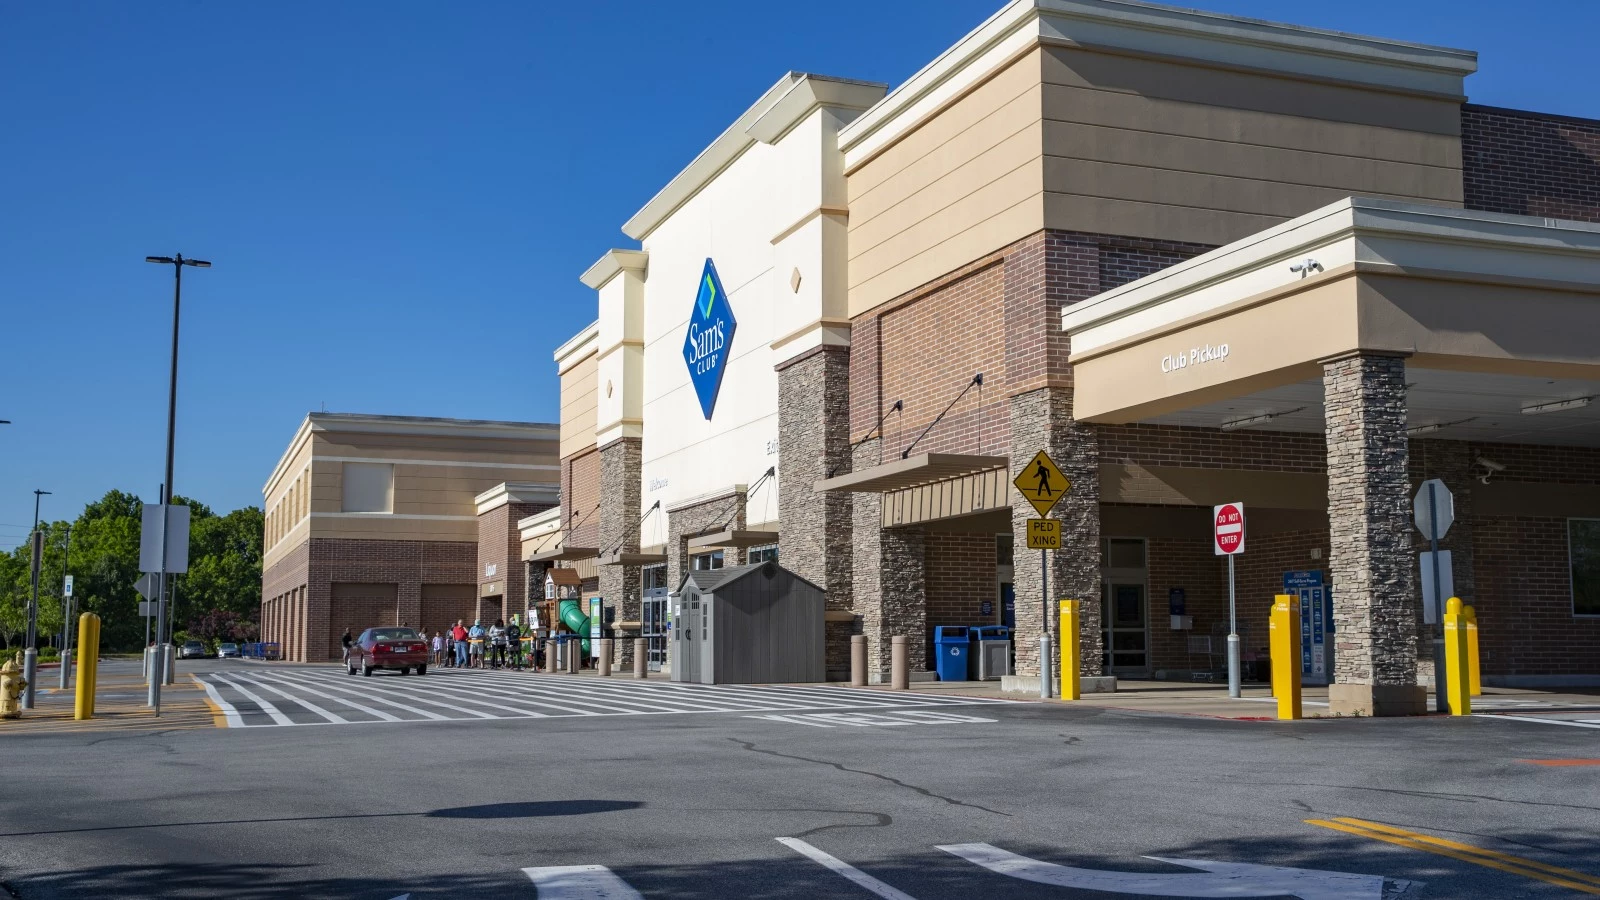 Walmart-Owned Sam's Club Plans to Open 30 New Warehouses Across the US